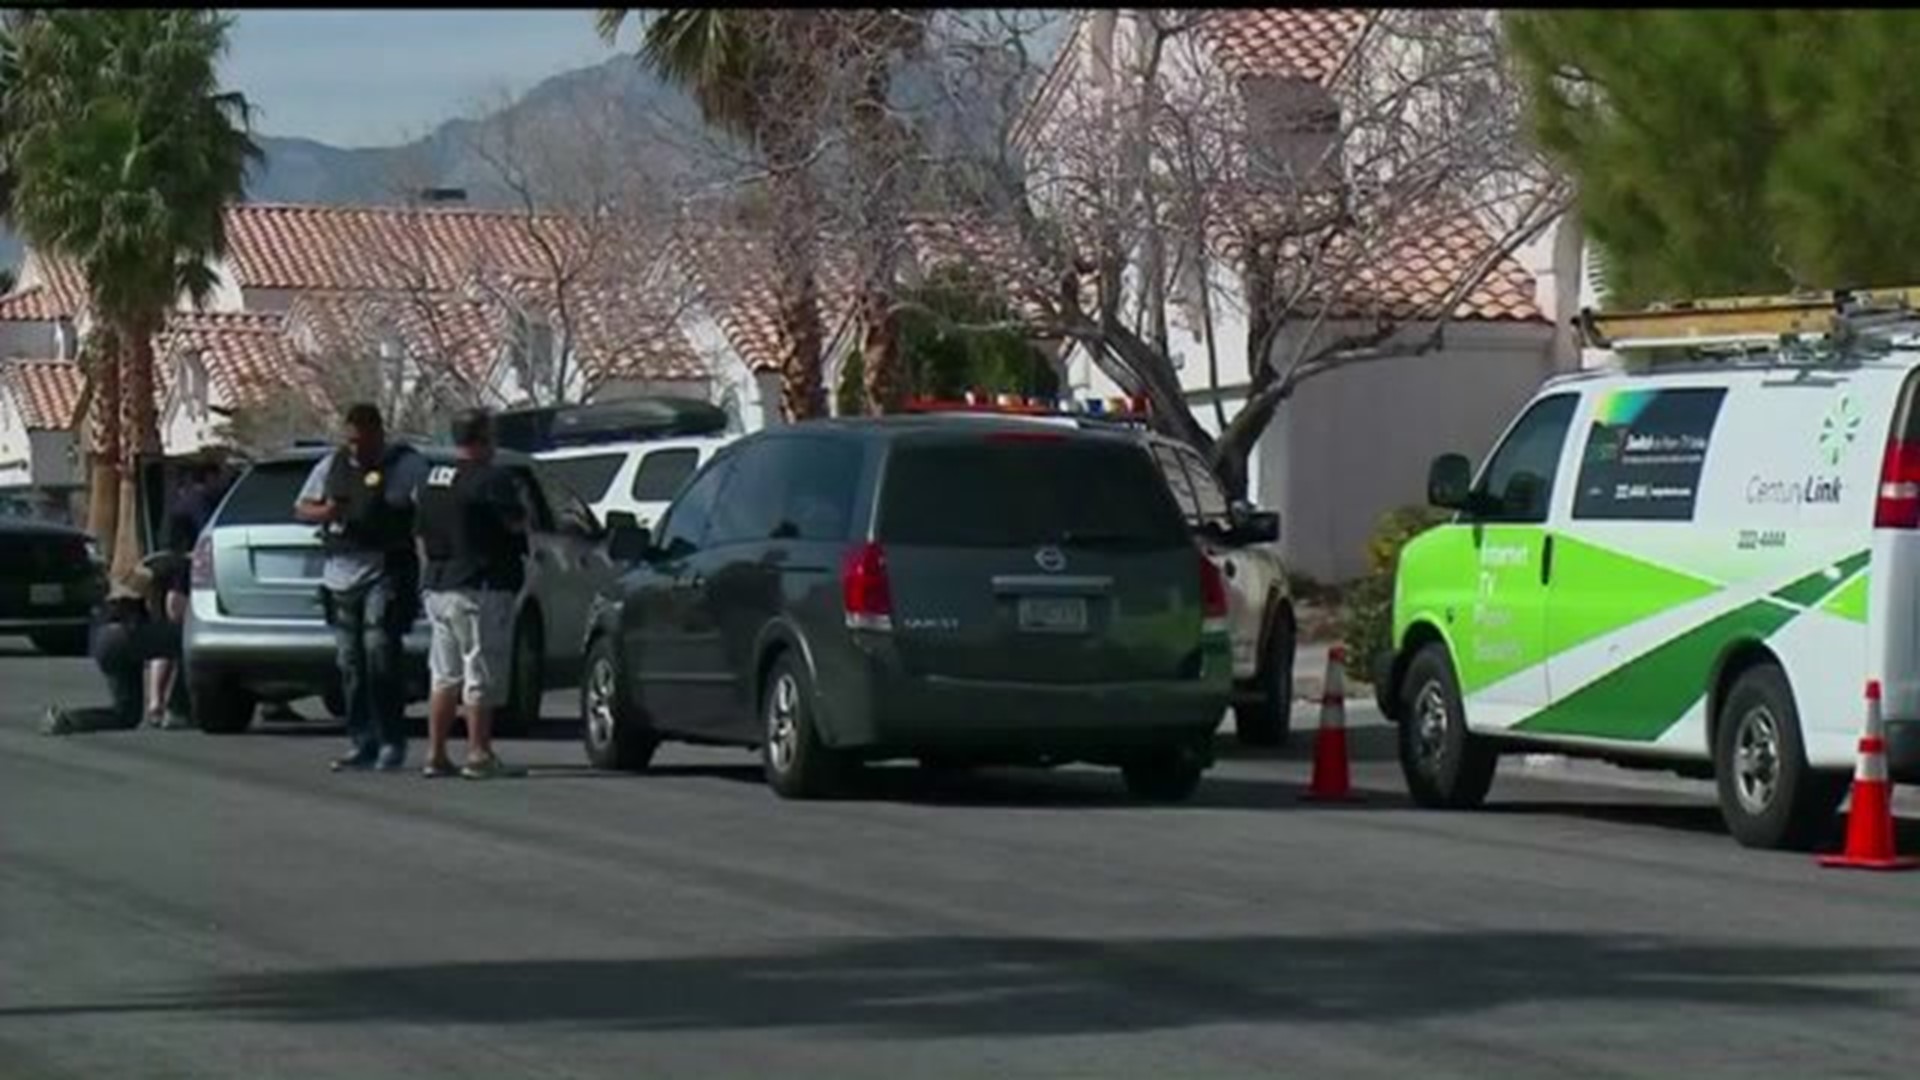 Las Vegas road rage suspect arrested after tense standoff with police